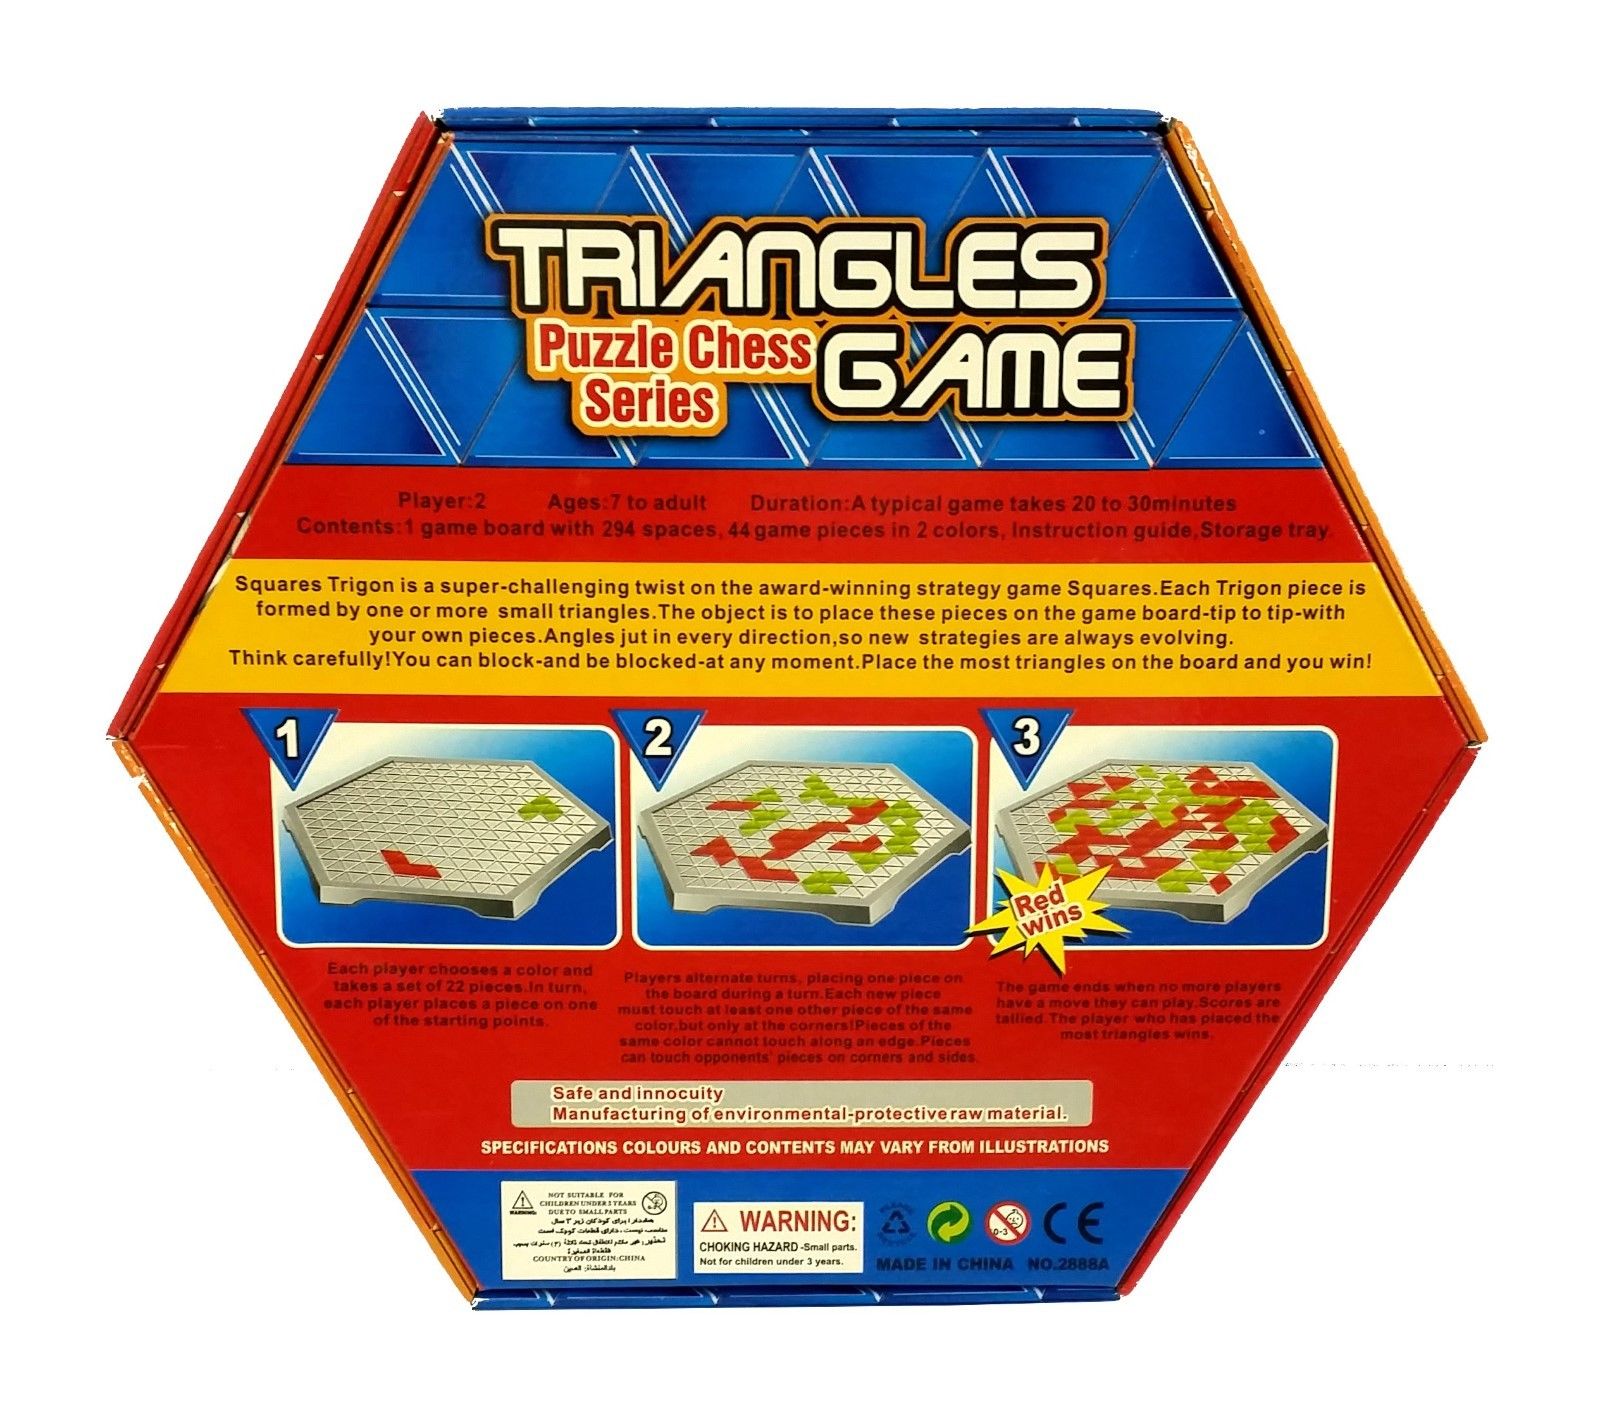 TRIANGLES GAME Puzzle Chess